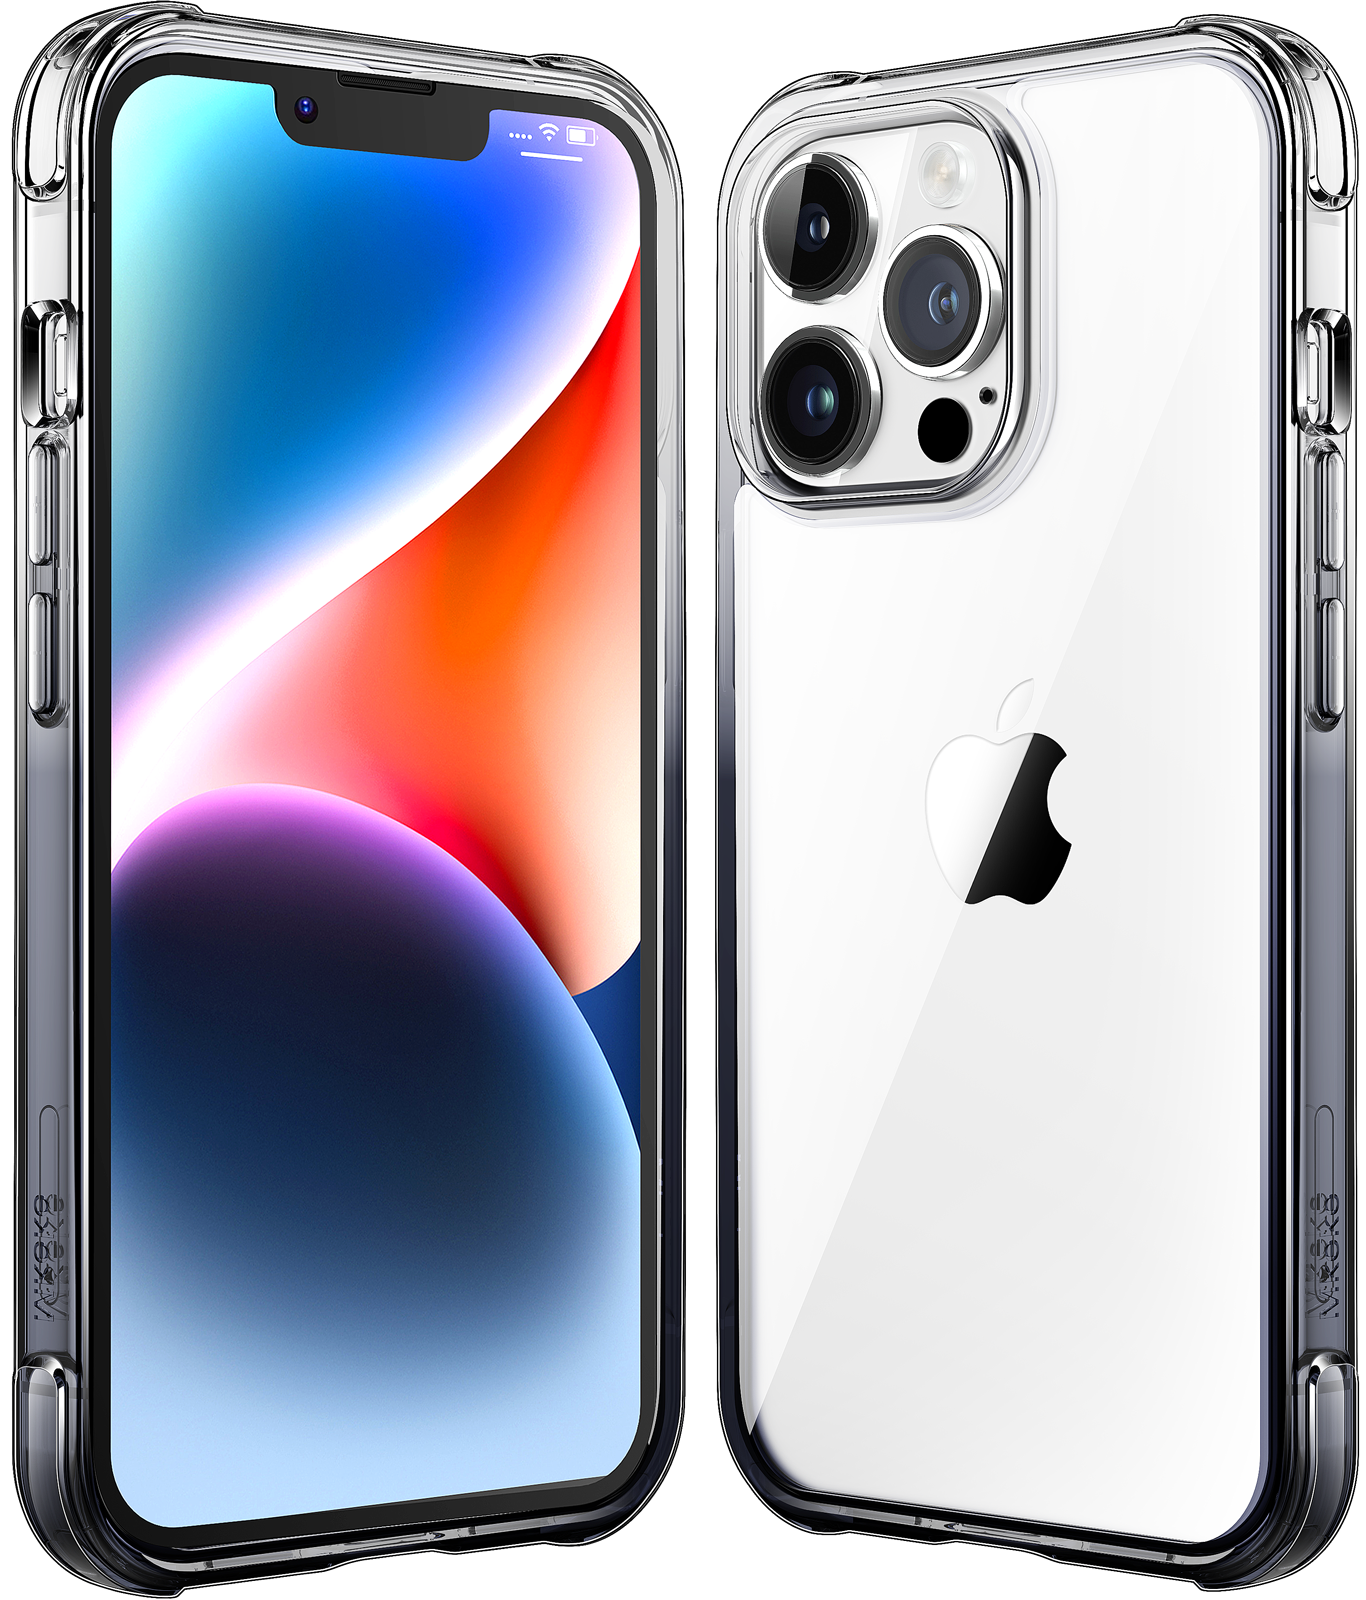 Apple Released a Clear Case That Shows Off the New iPhone 11 Colors